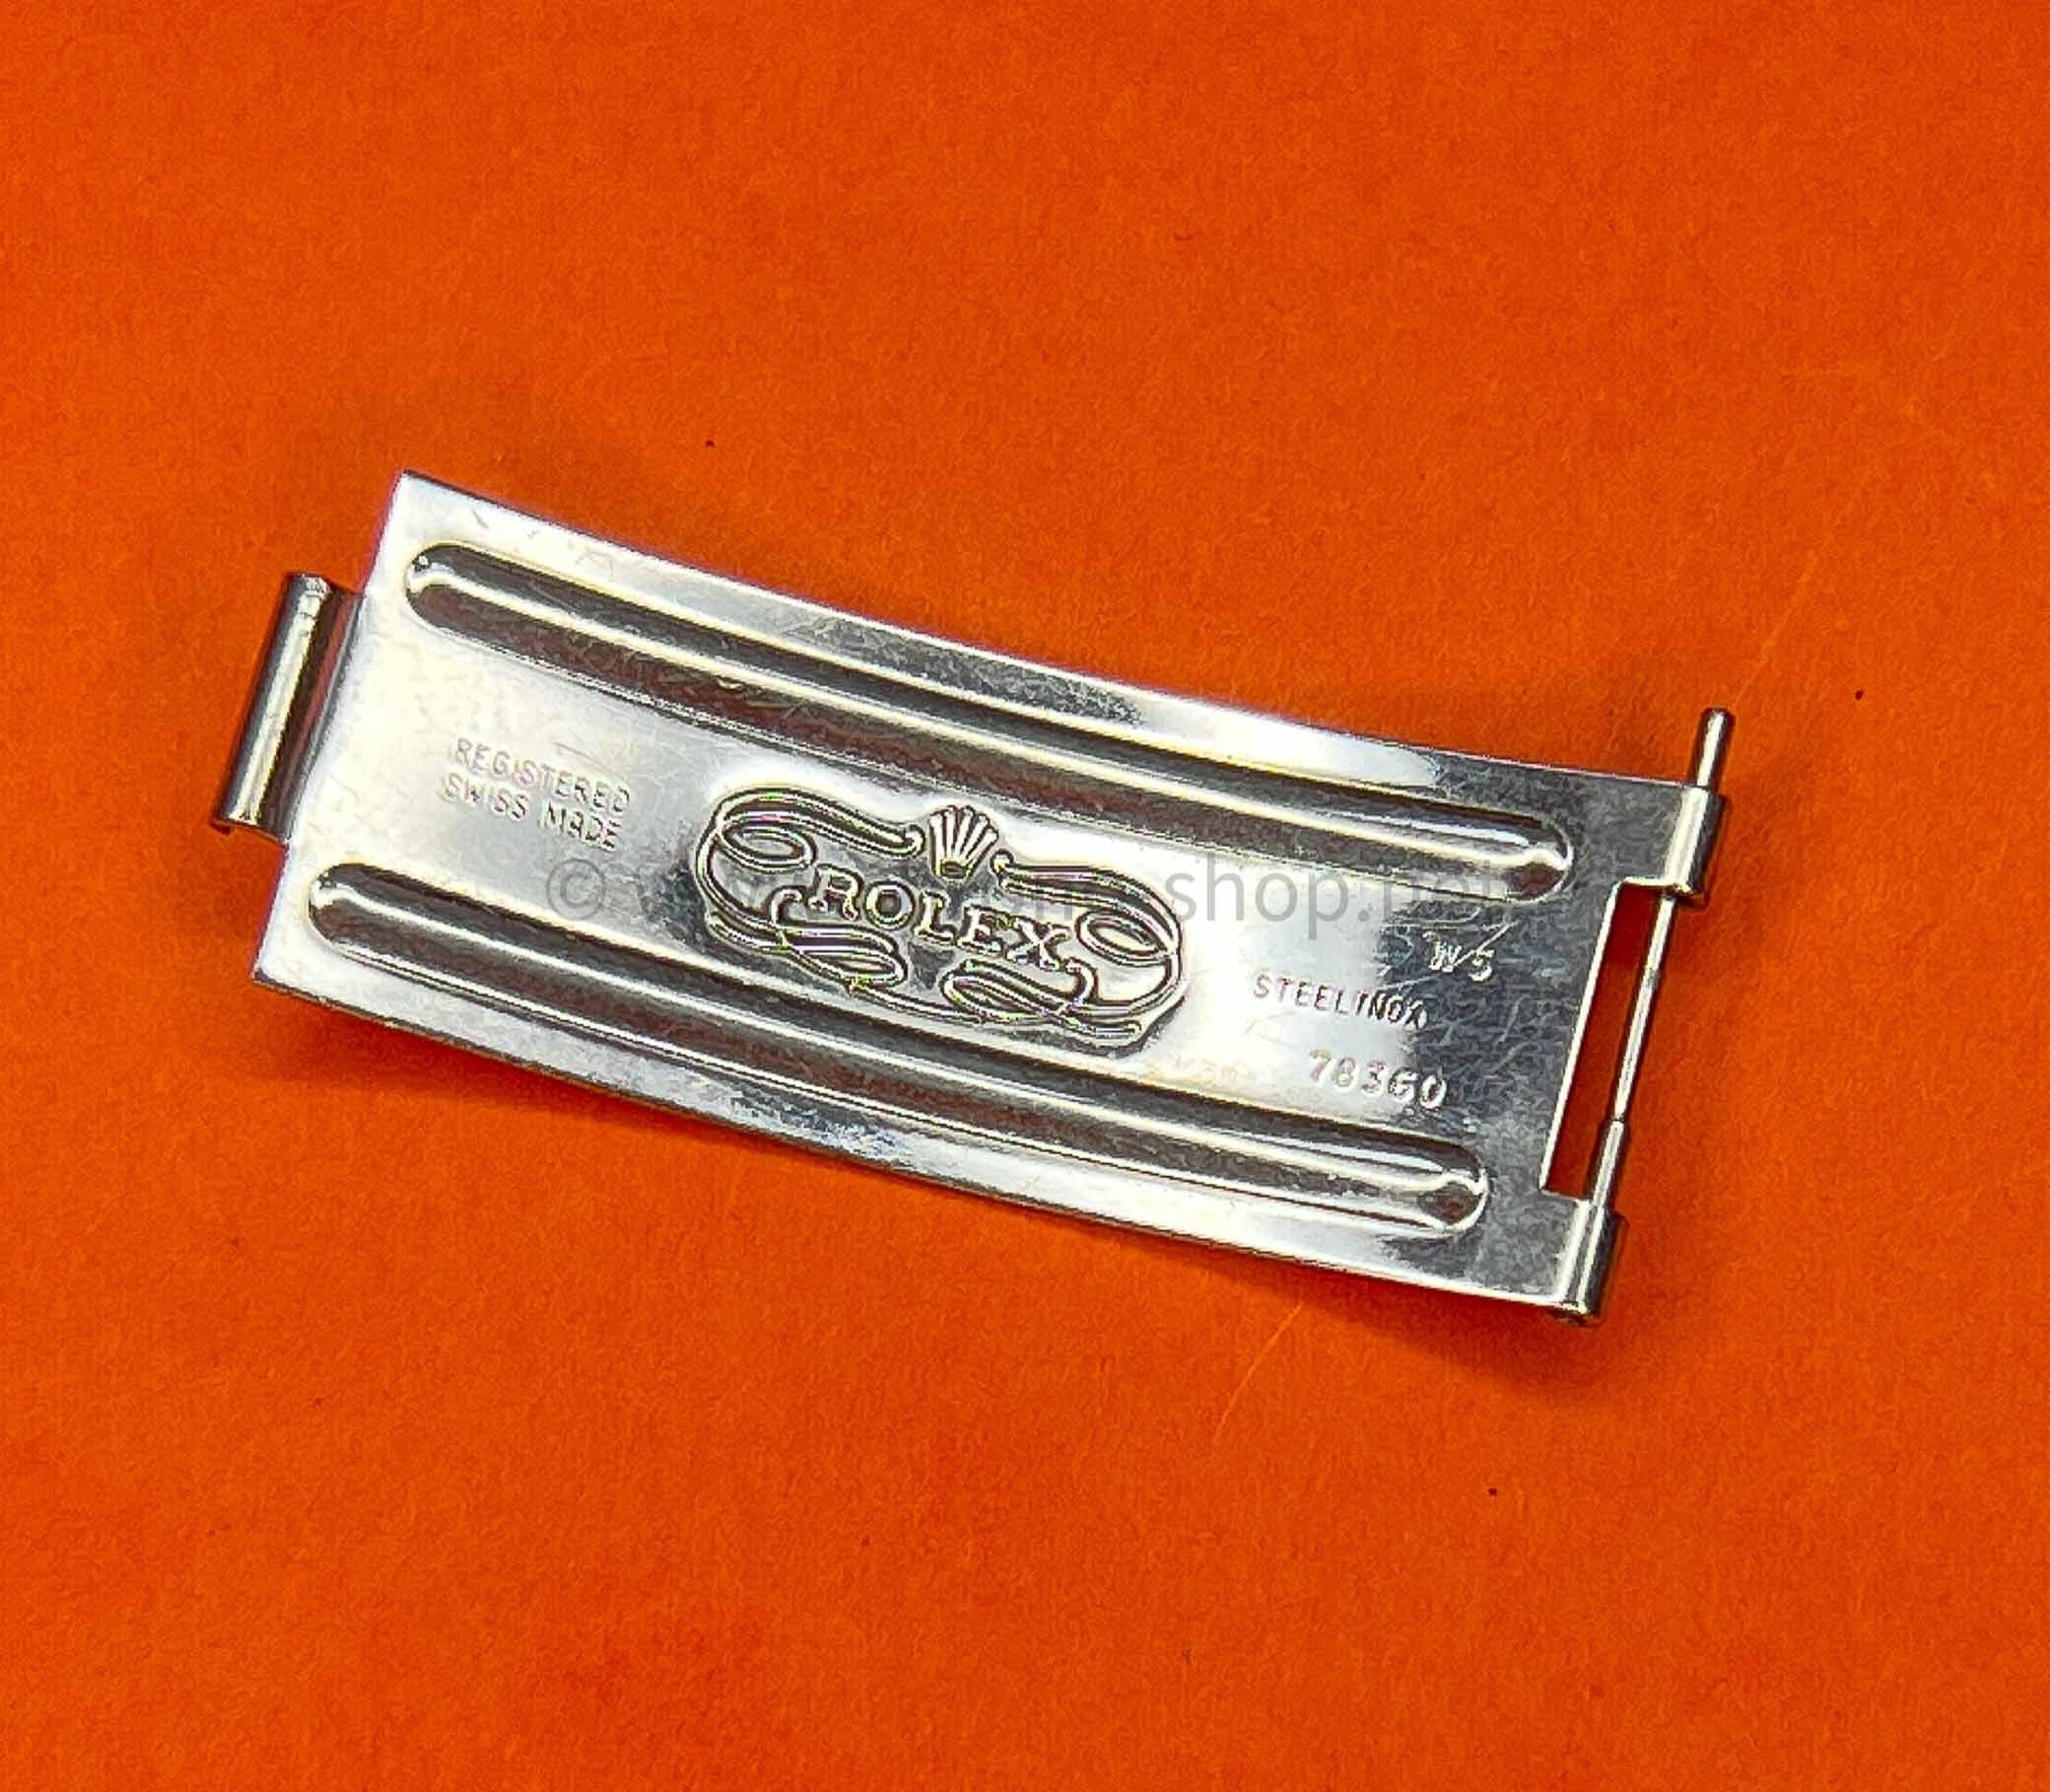 Rolex Rare 1995 Code year clasp Blade'Clasp Oyster Bracelet Band 78360 ...